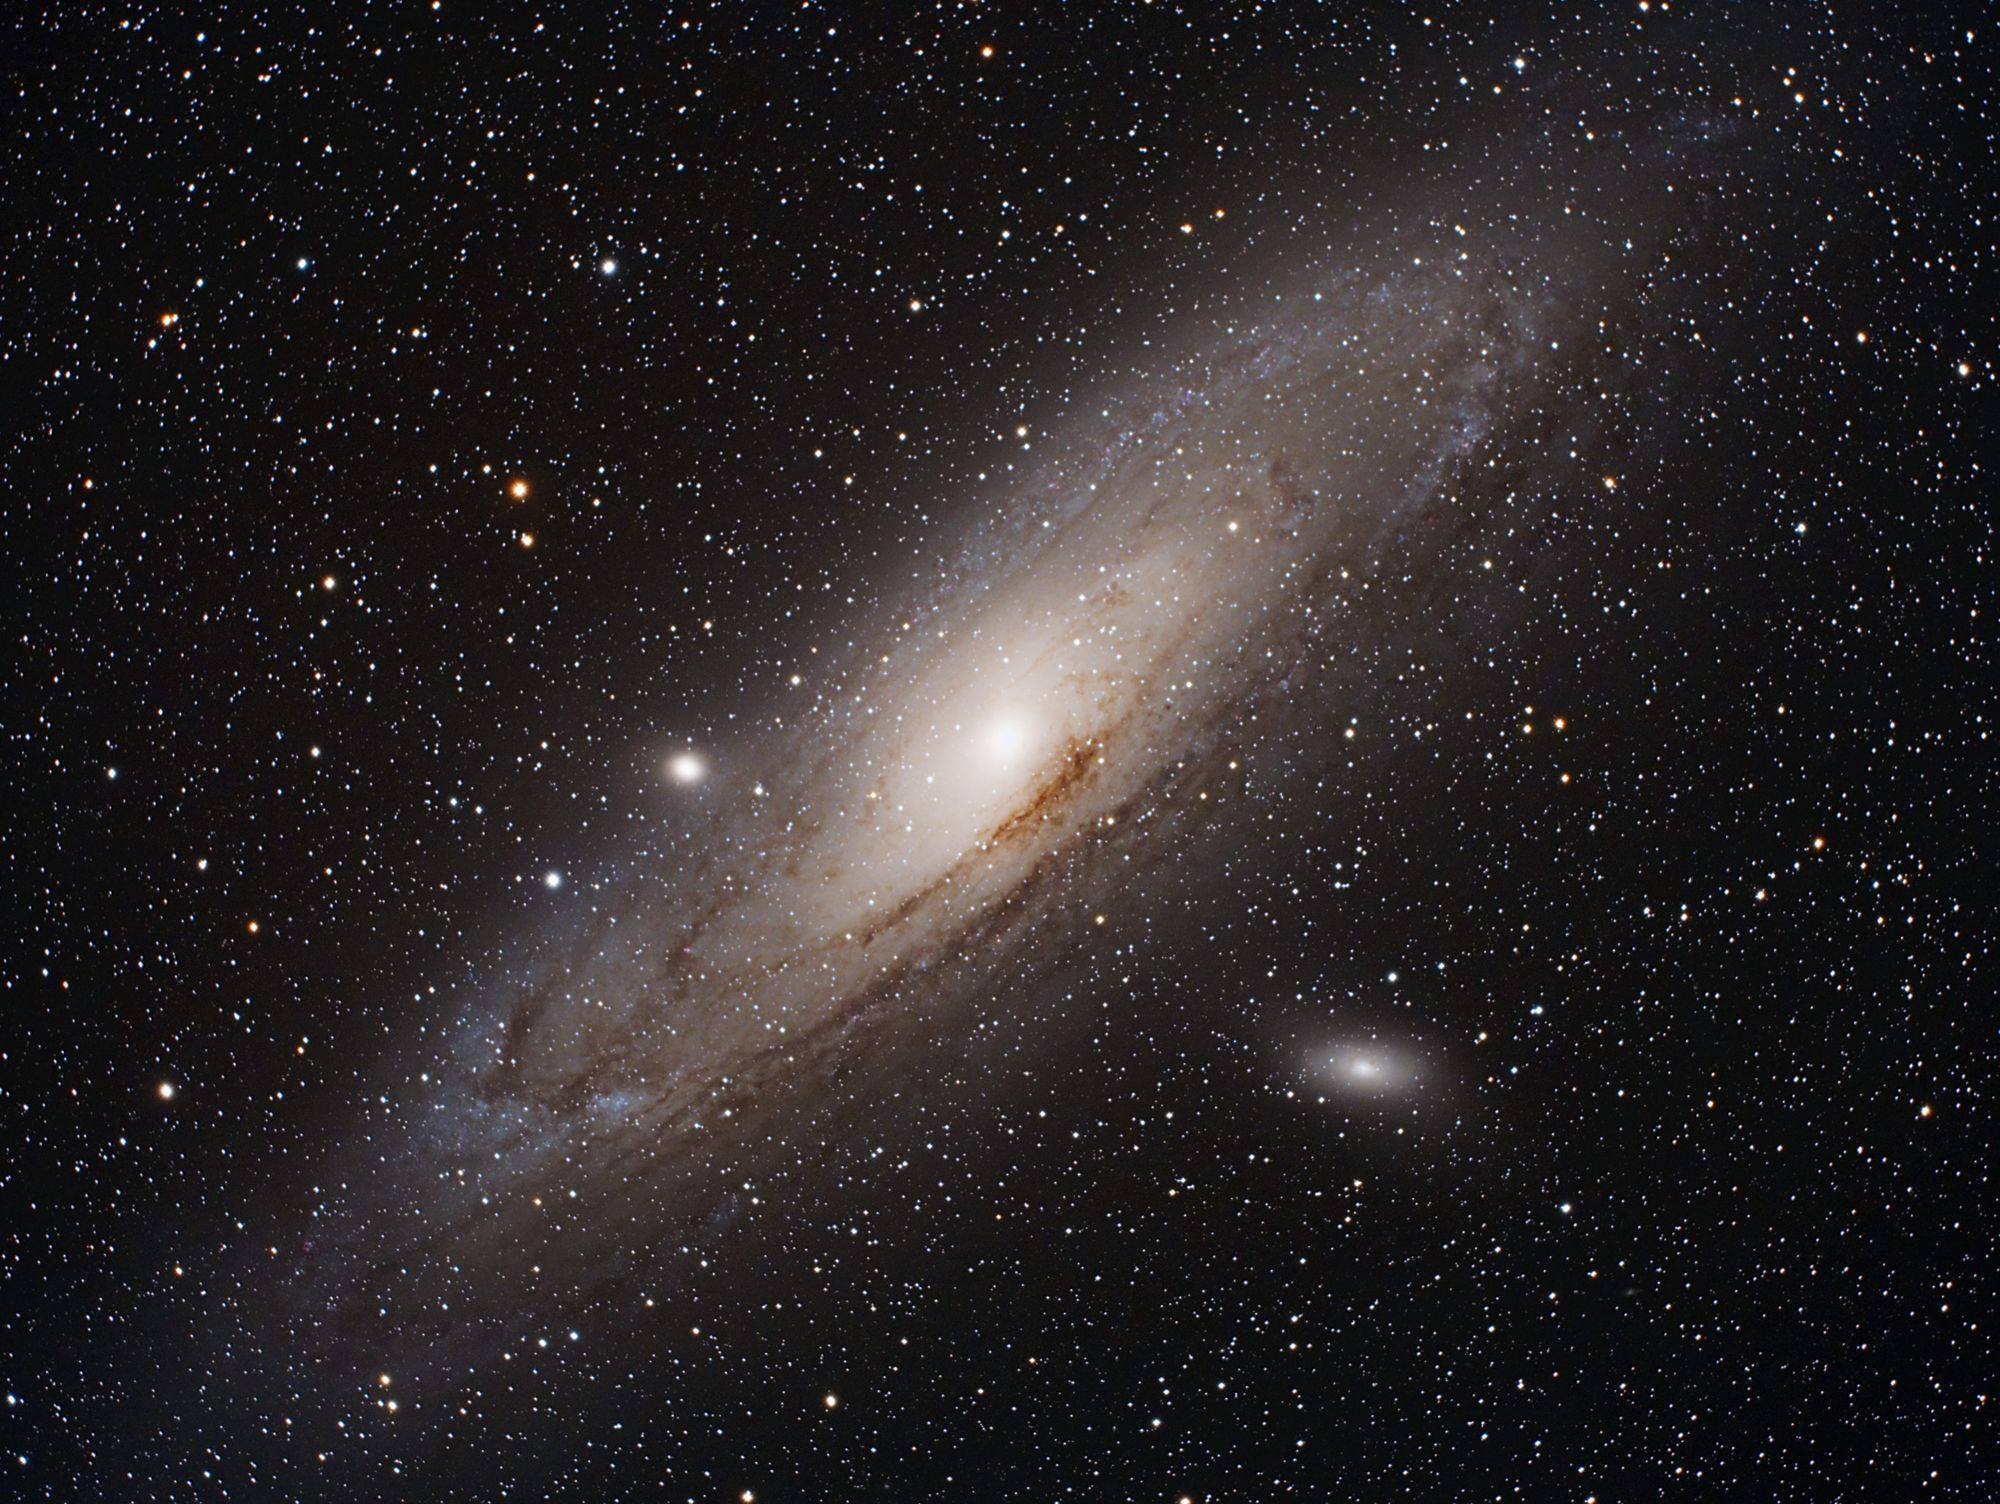 M31 - Andromeda Galaxy | Astronomy Pictures at Orion Telescopes Andromeda Through 8 Inch Telescope